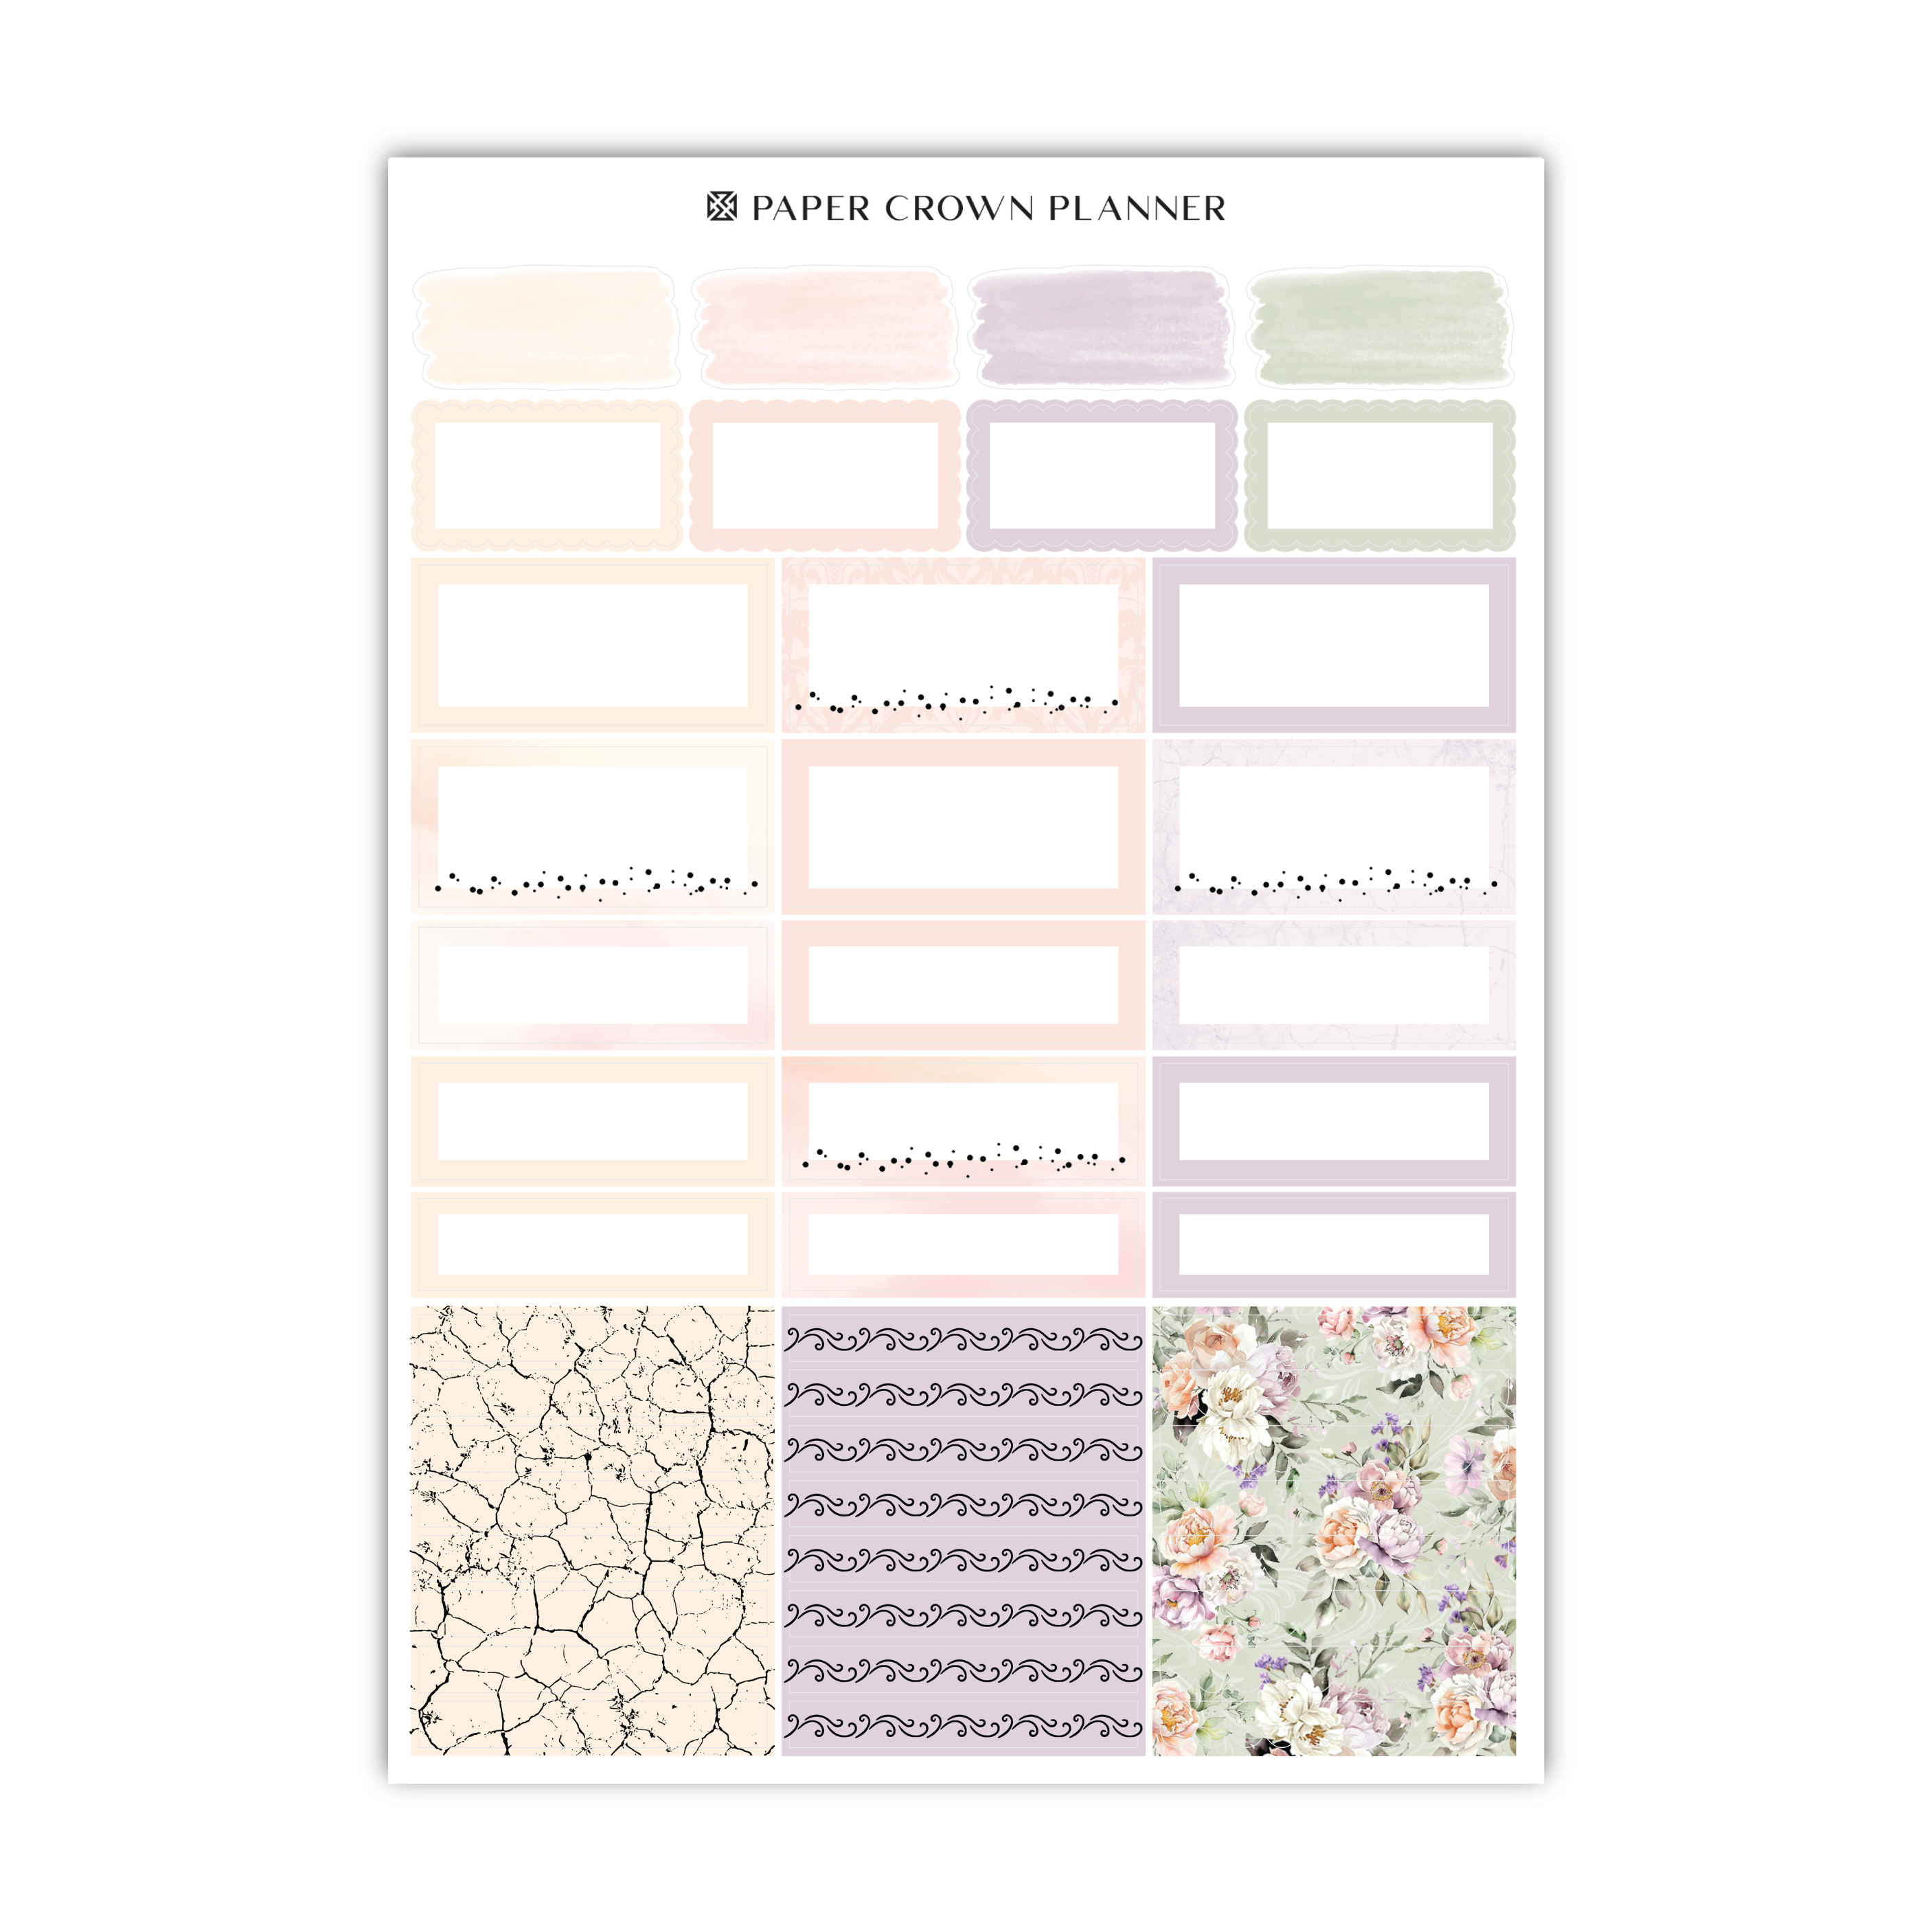 a printable planner with a variety of different patterns